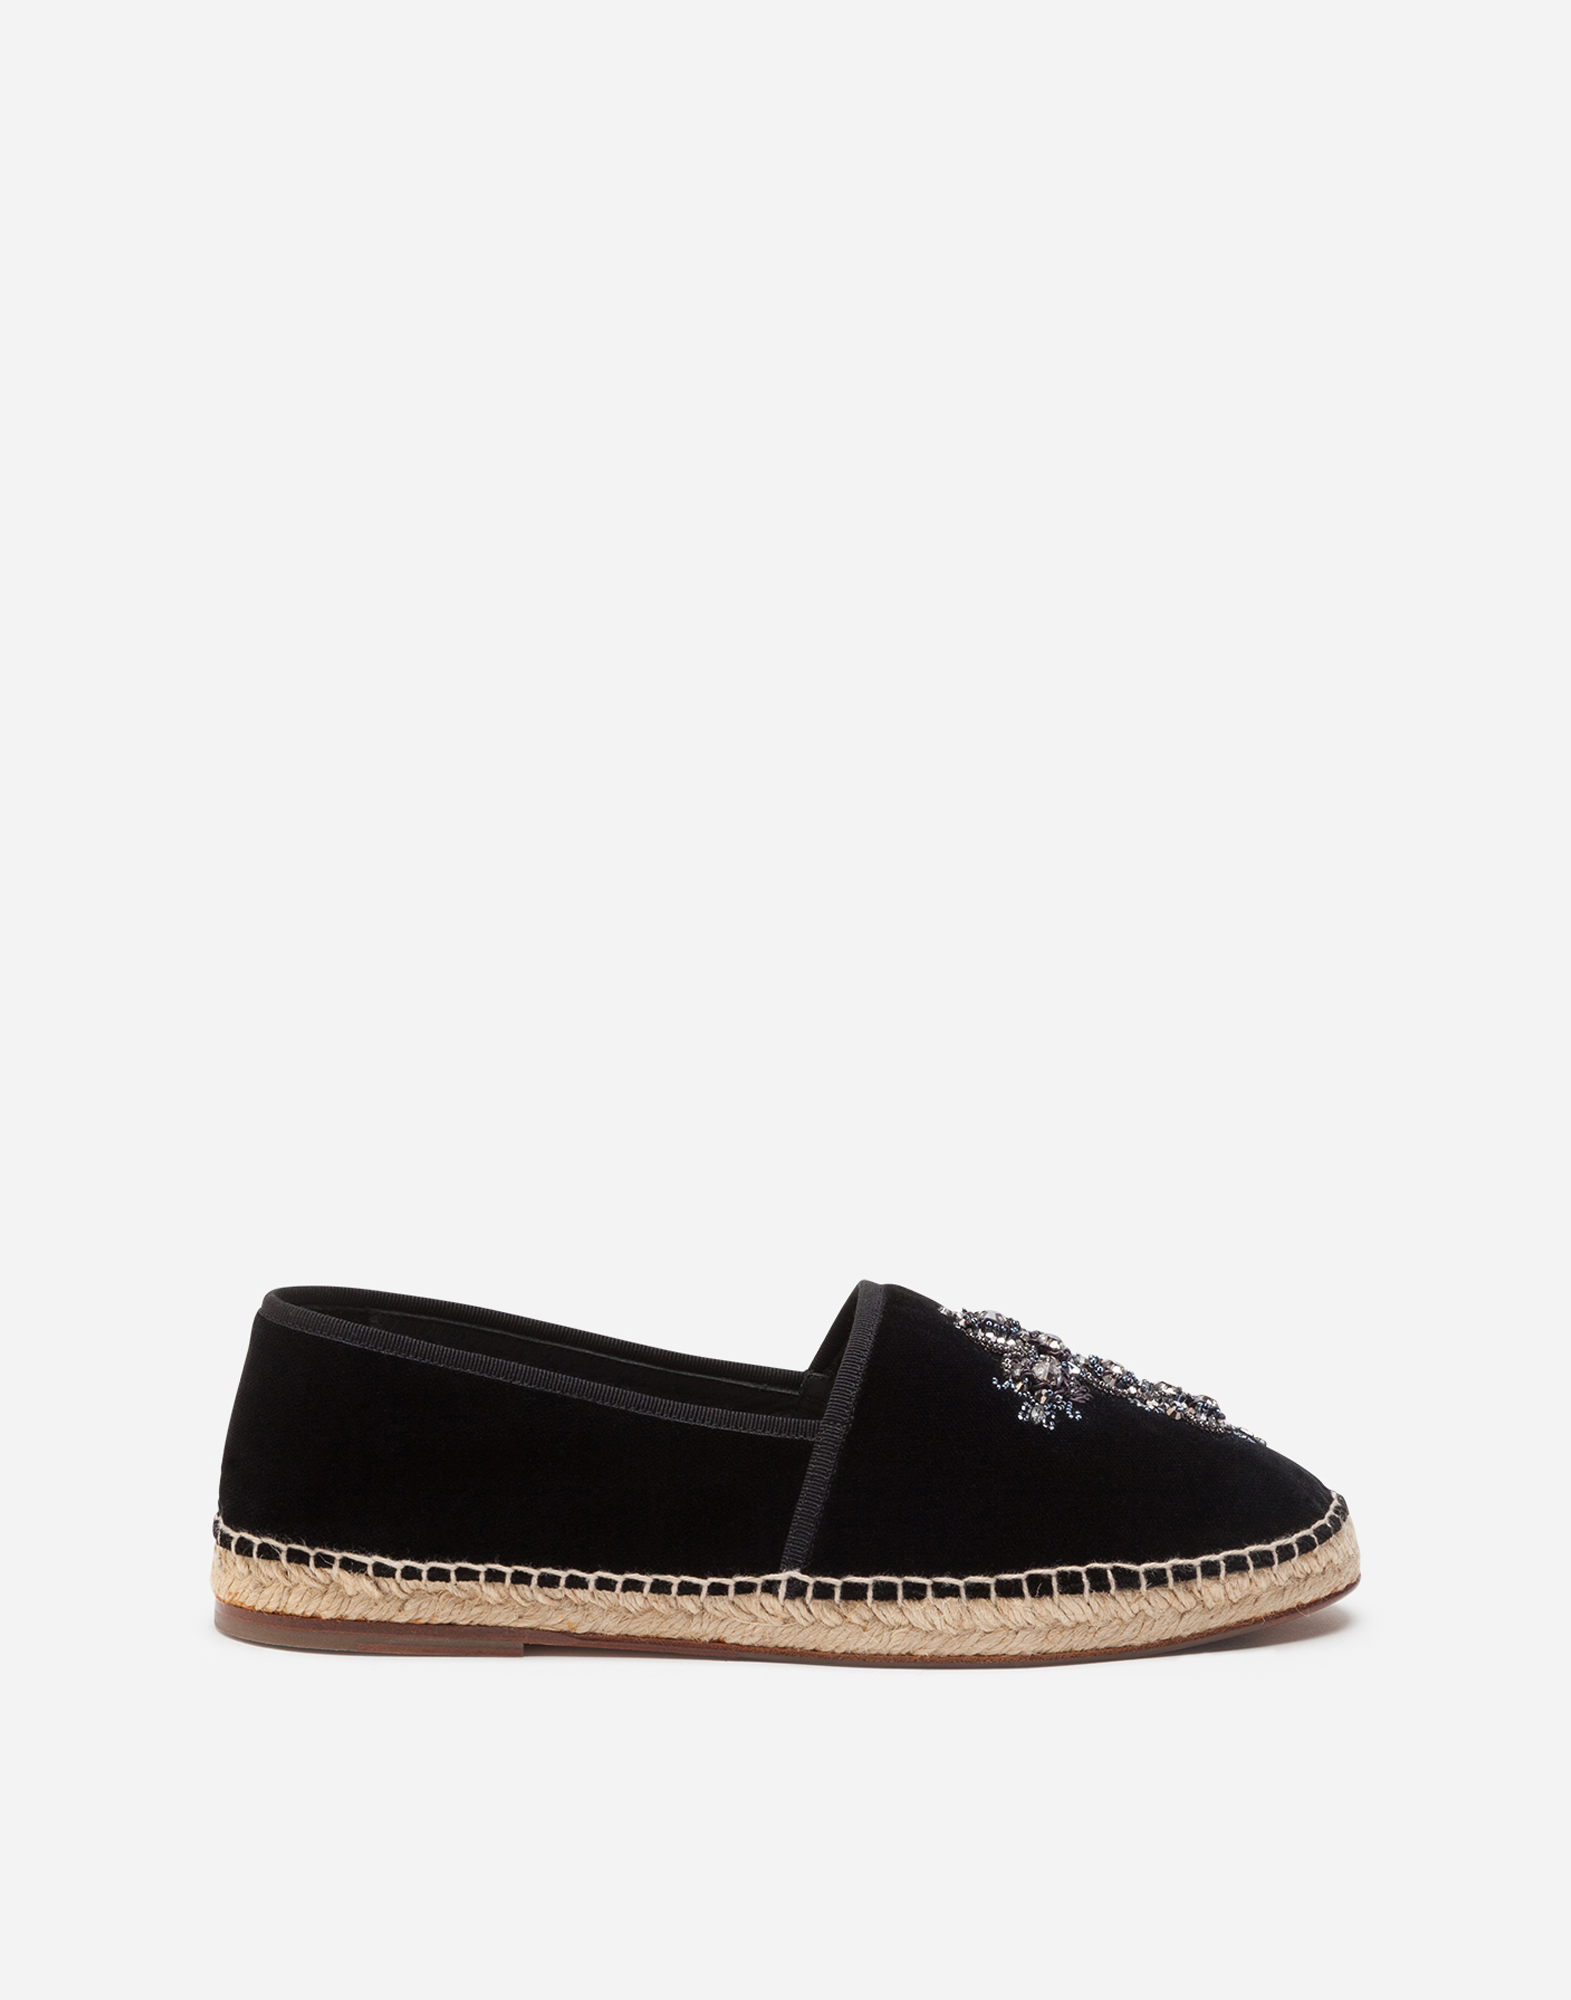 DOLCE & GABBANA VELVET ESPADRILLES WITH ROPE SOLE AND CROSS EMBROIDERY